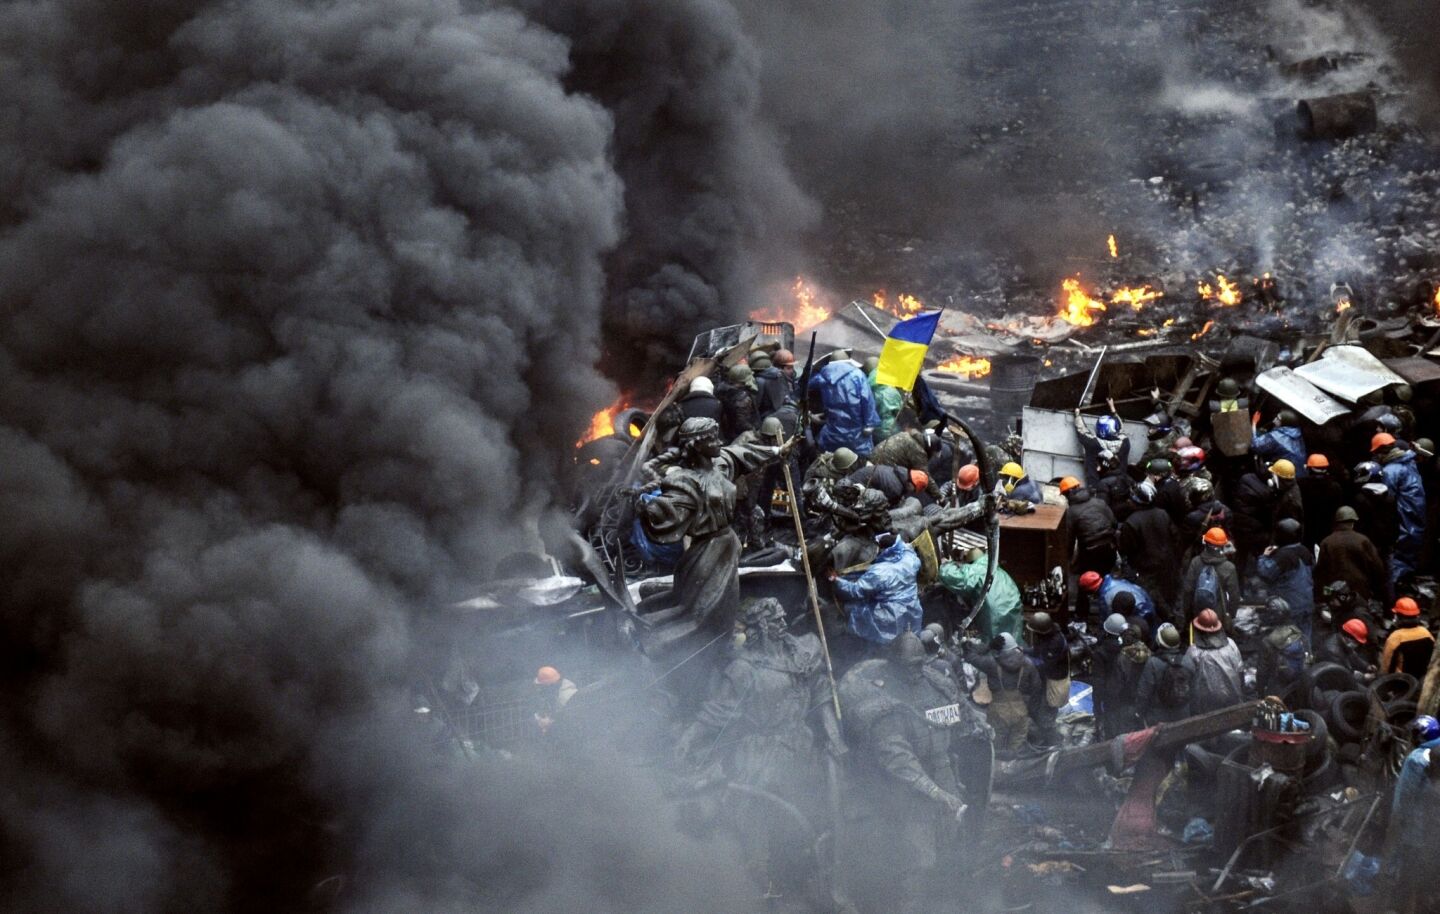 Ukrainian protesters stand behind burning barricades during a face-off against police in Kiev.